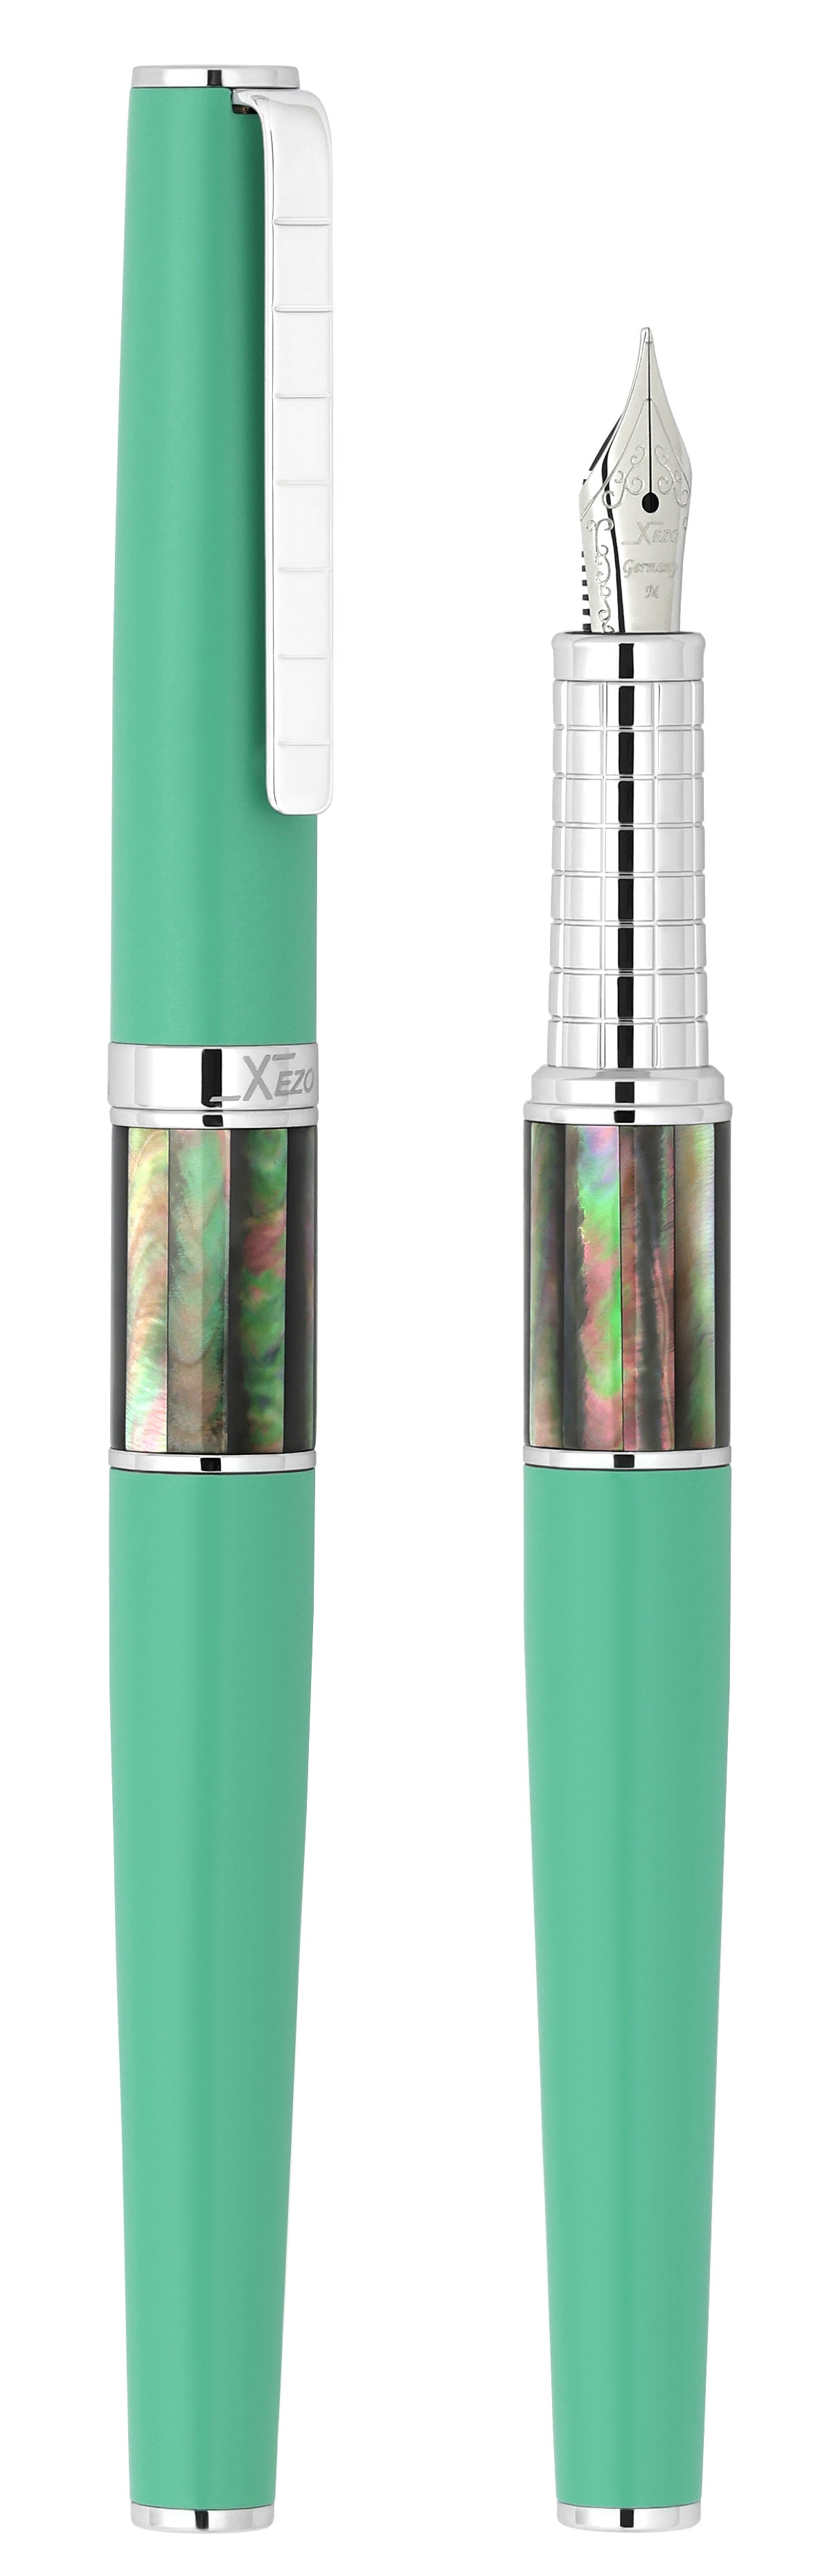 Xezo - Vertical view of two Speed Master Aqua Green FM-BC Fountain pens; the one on the left is capped, and the one on the right is uncapped